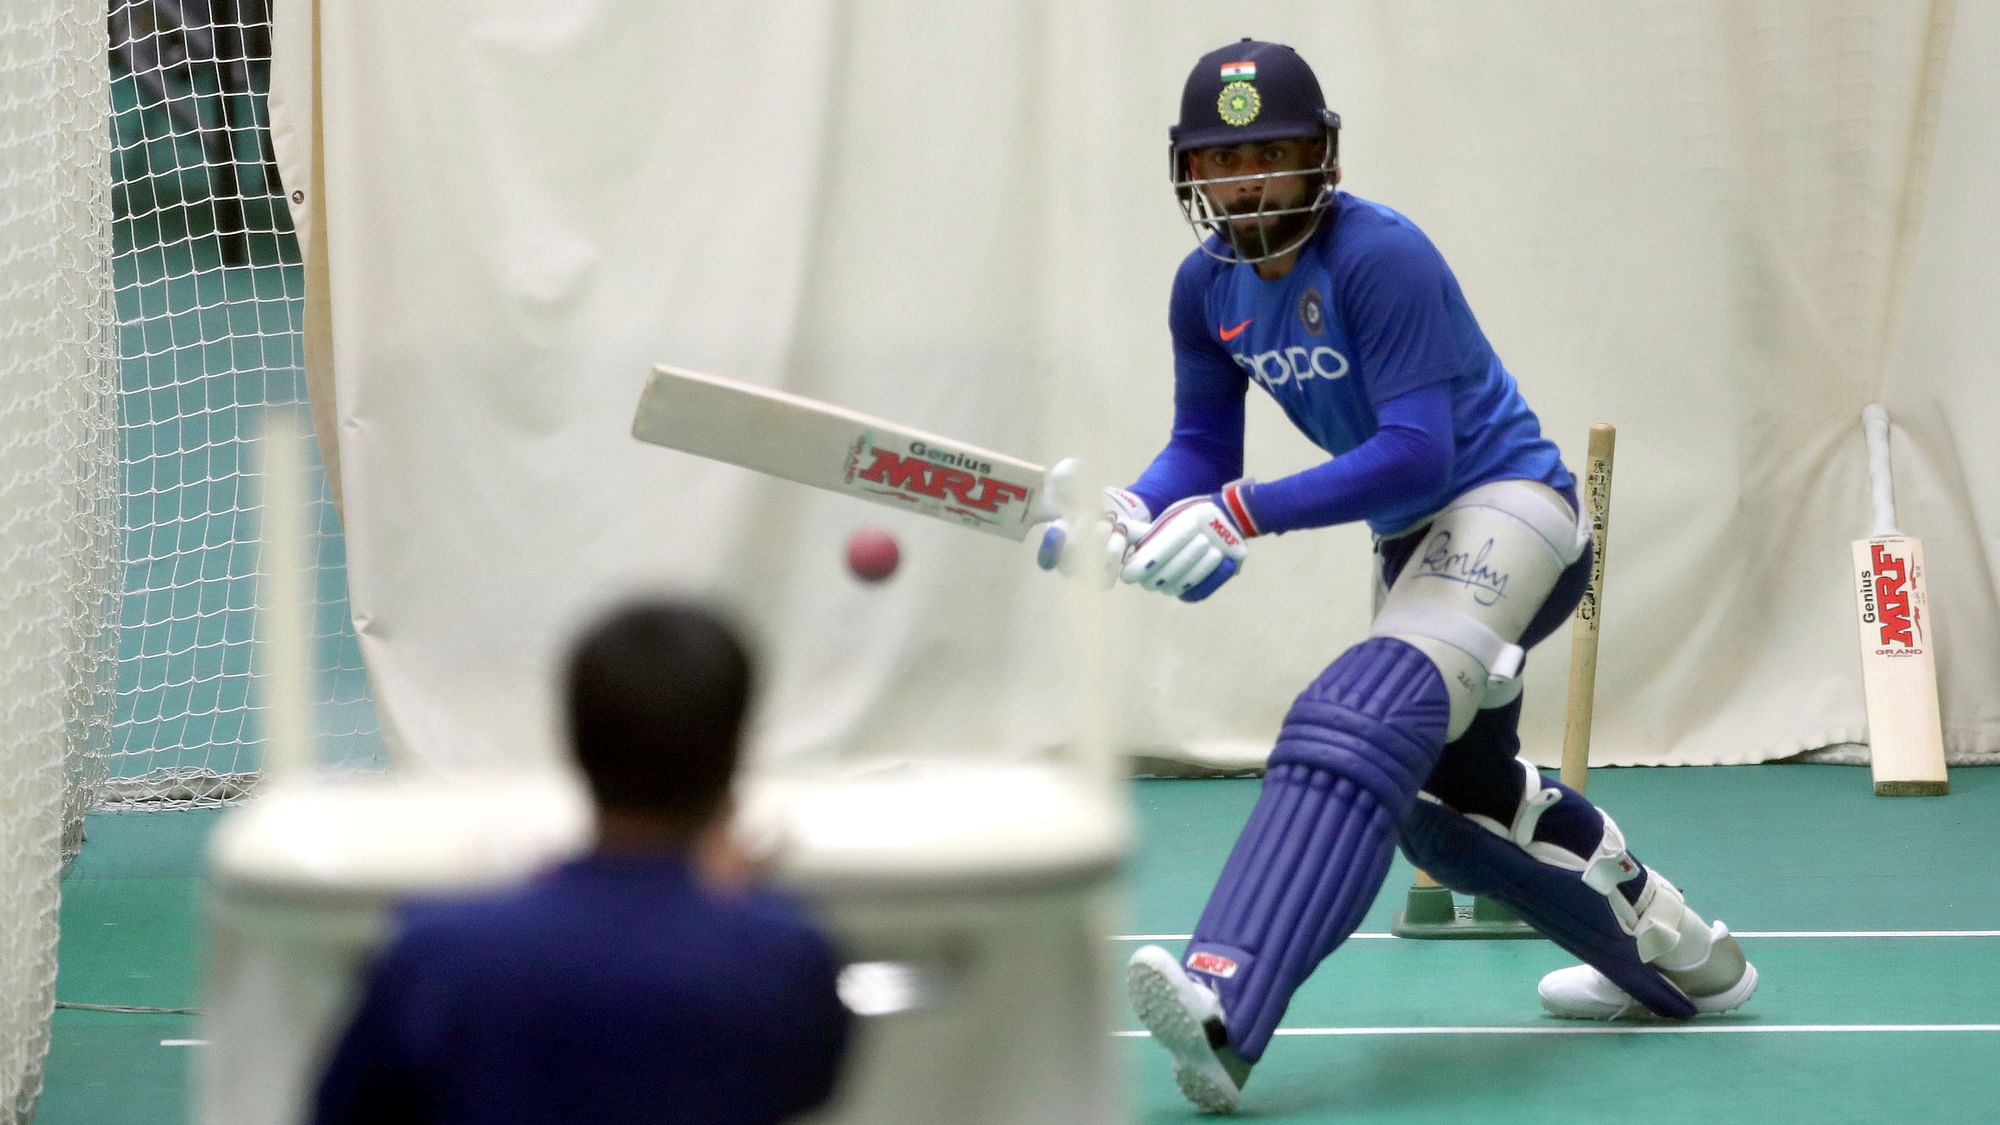 India’s captain Virat Kohli bats in the nets using a bowling machine during an indoor training session.